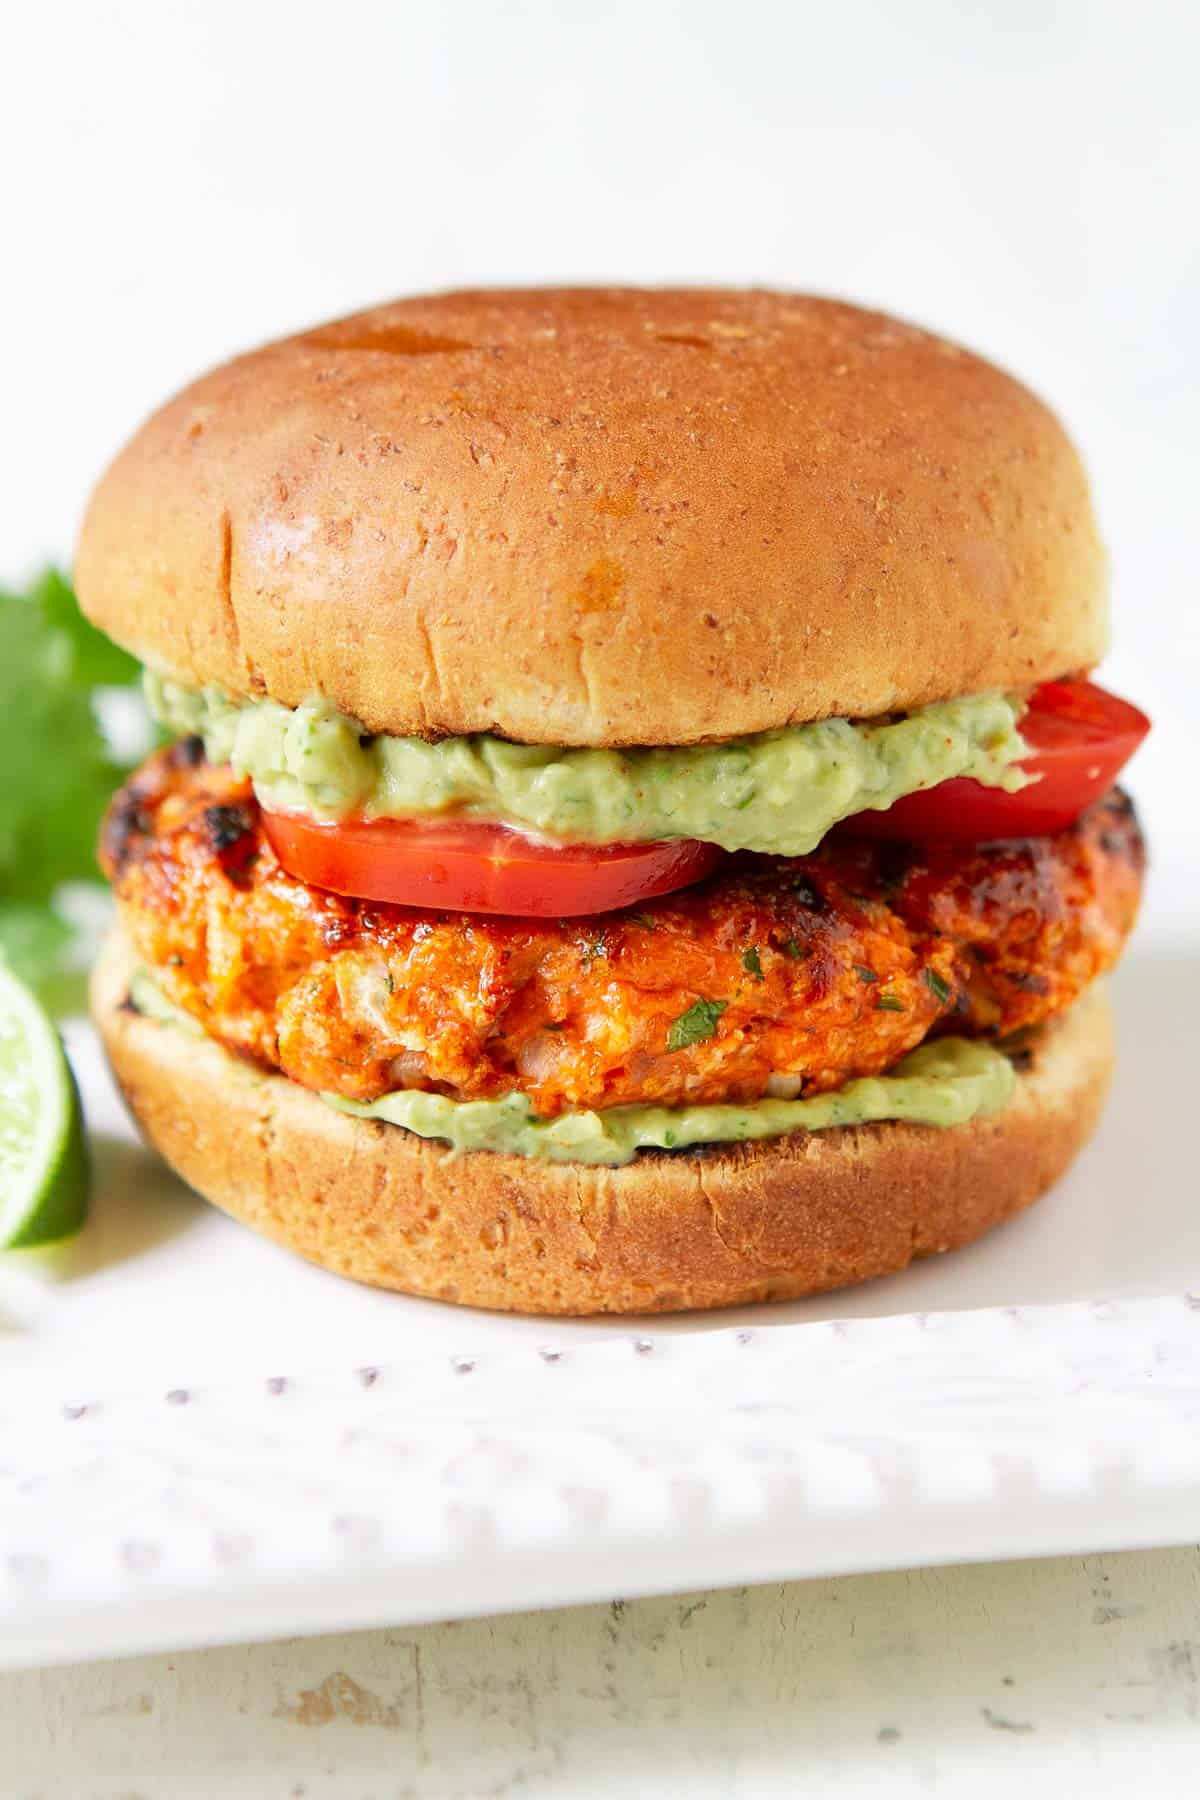 Salmon burger with avocado sauce and tomato on a white plate.